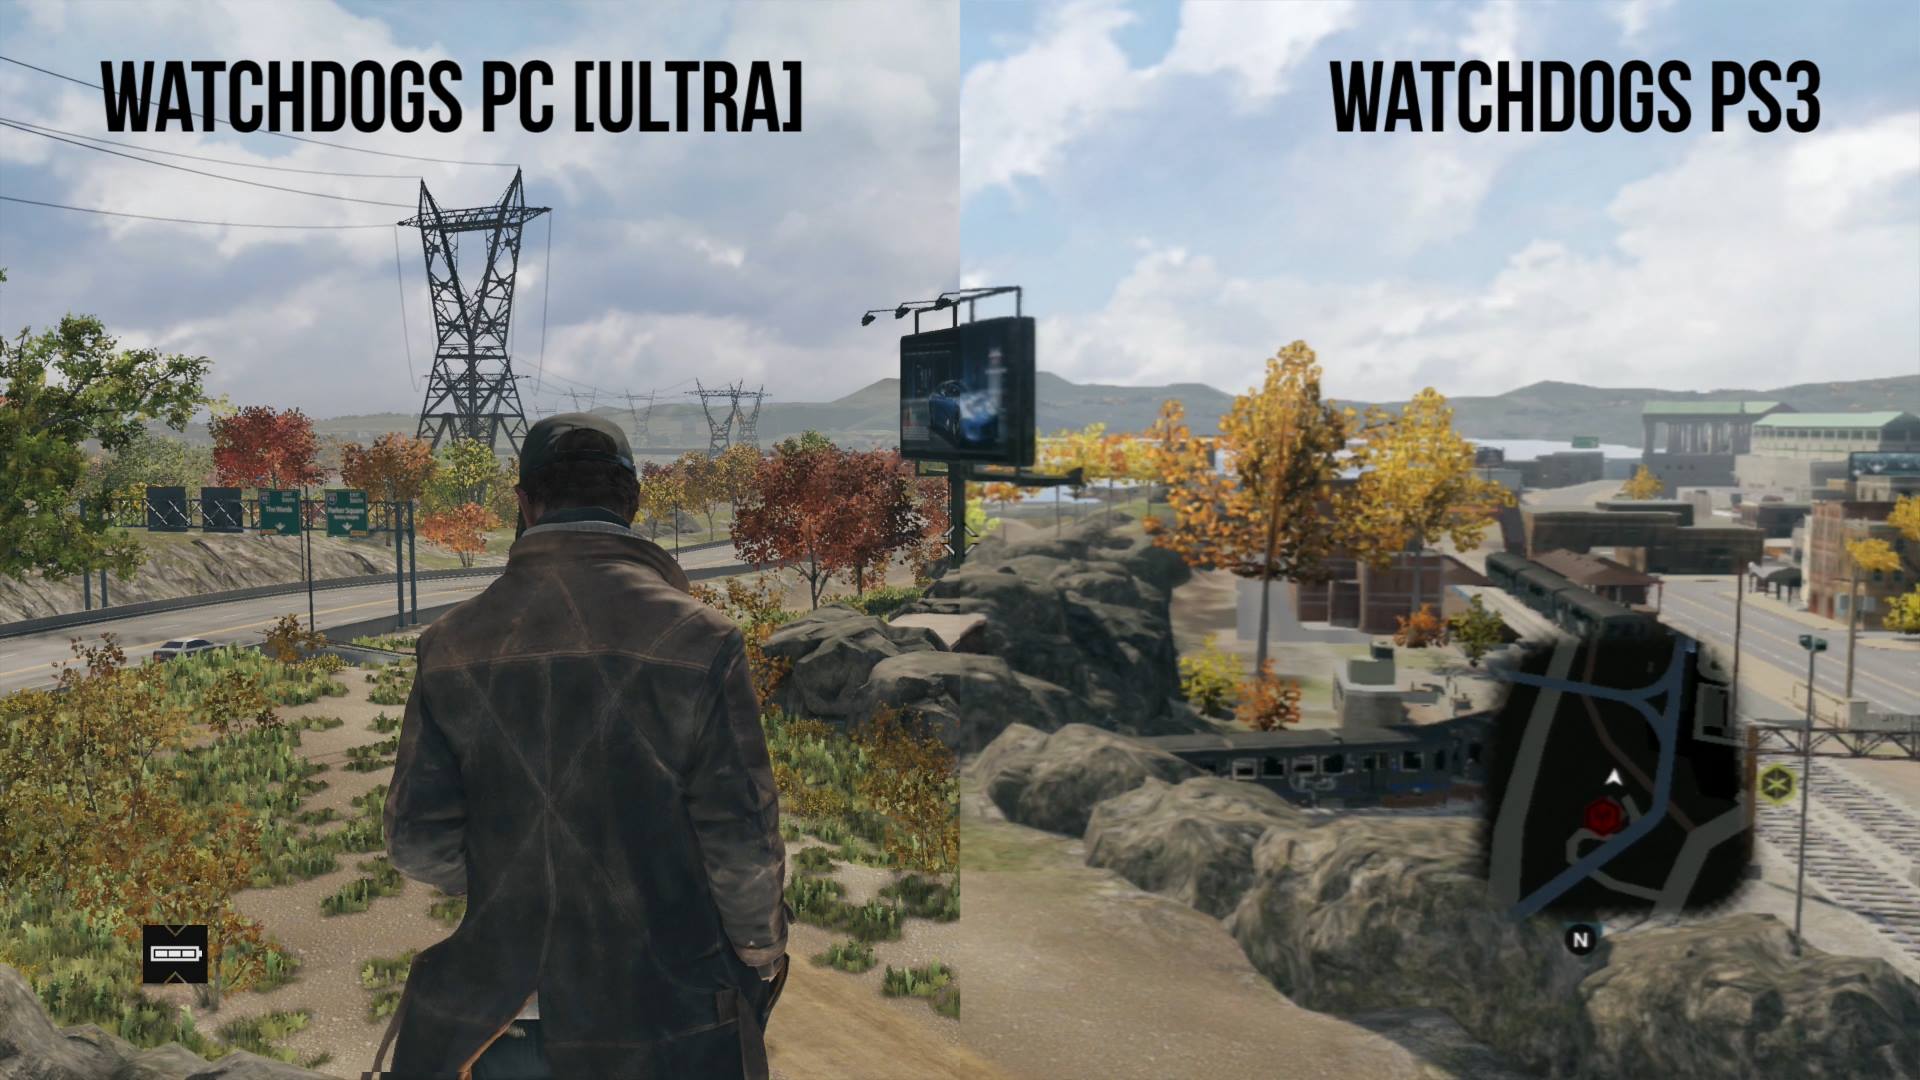 pc vs console - Watchdogs Pc Ultra Watchdogs PS3